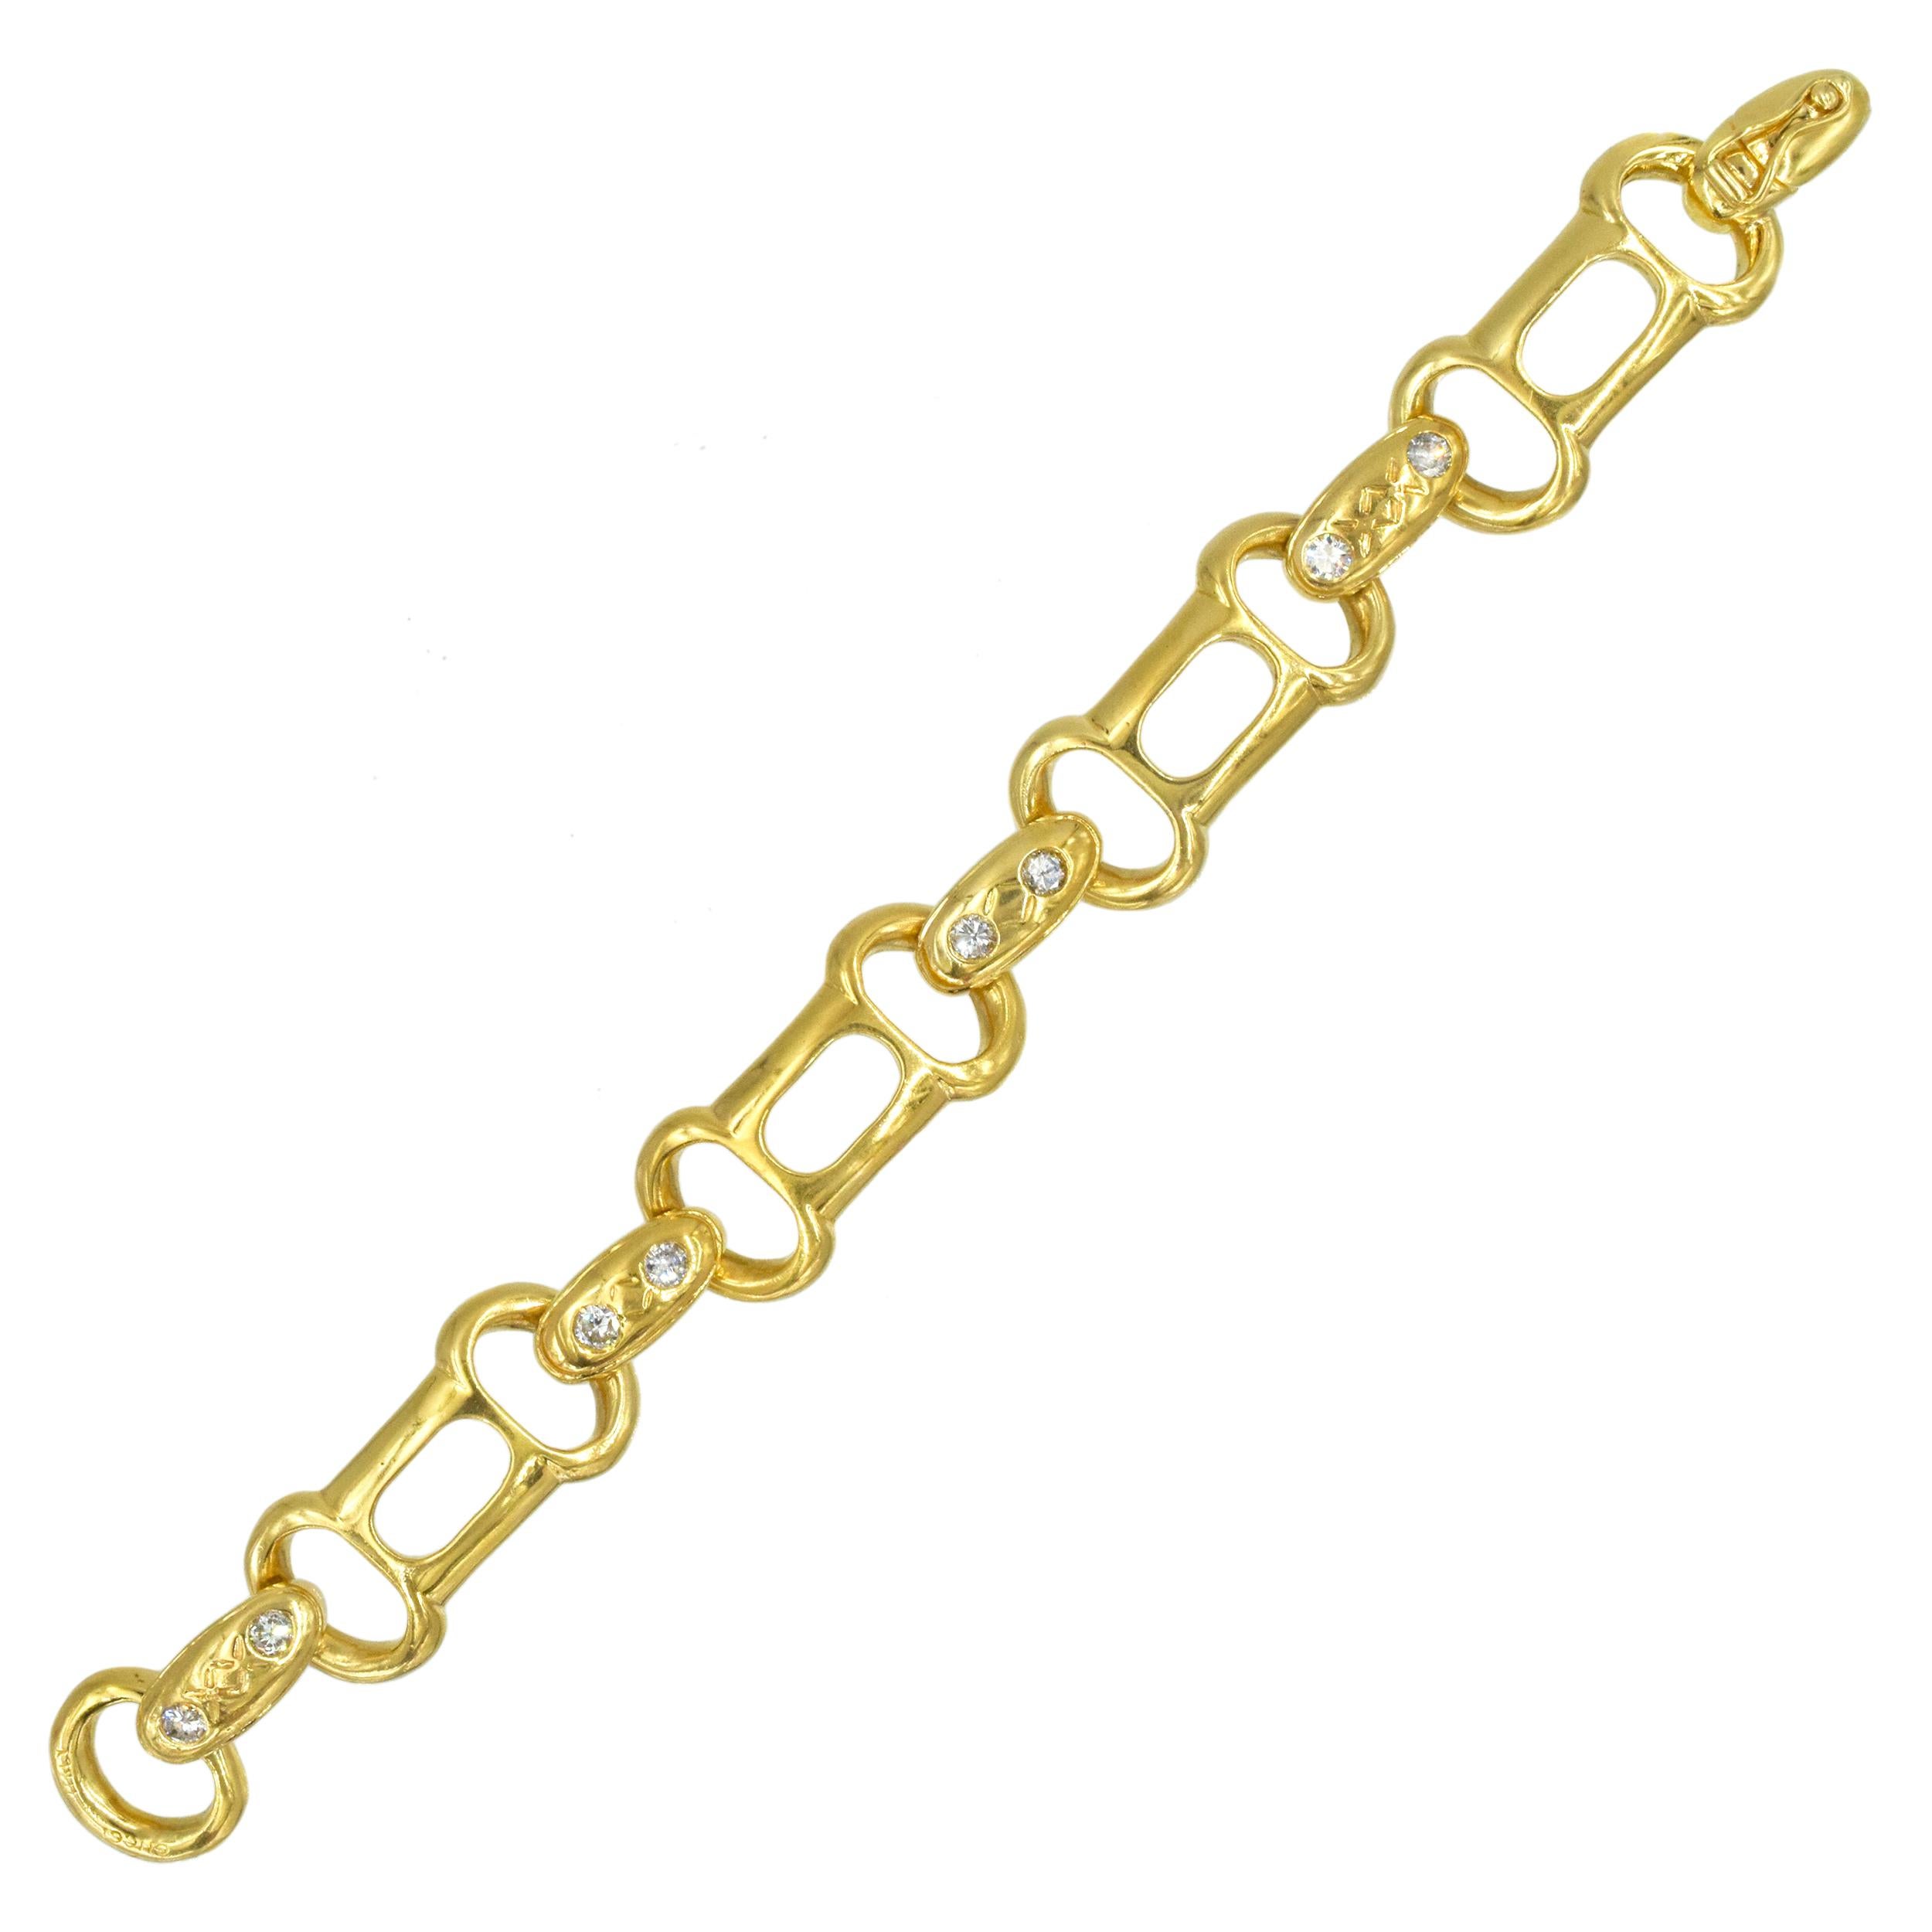 Vintage Gucci 18k yelow gold and diamond Horsebit bracelet. The bracelet features 4
elongated links alternating with 5 oval shape links. Four of the oval links set with two round brilliant cut diamonds, accented with engravings, the fifth link used